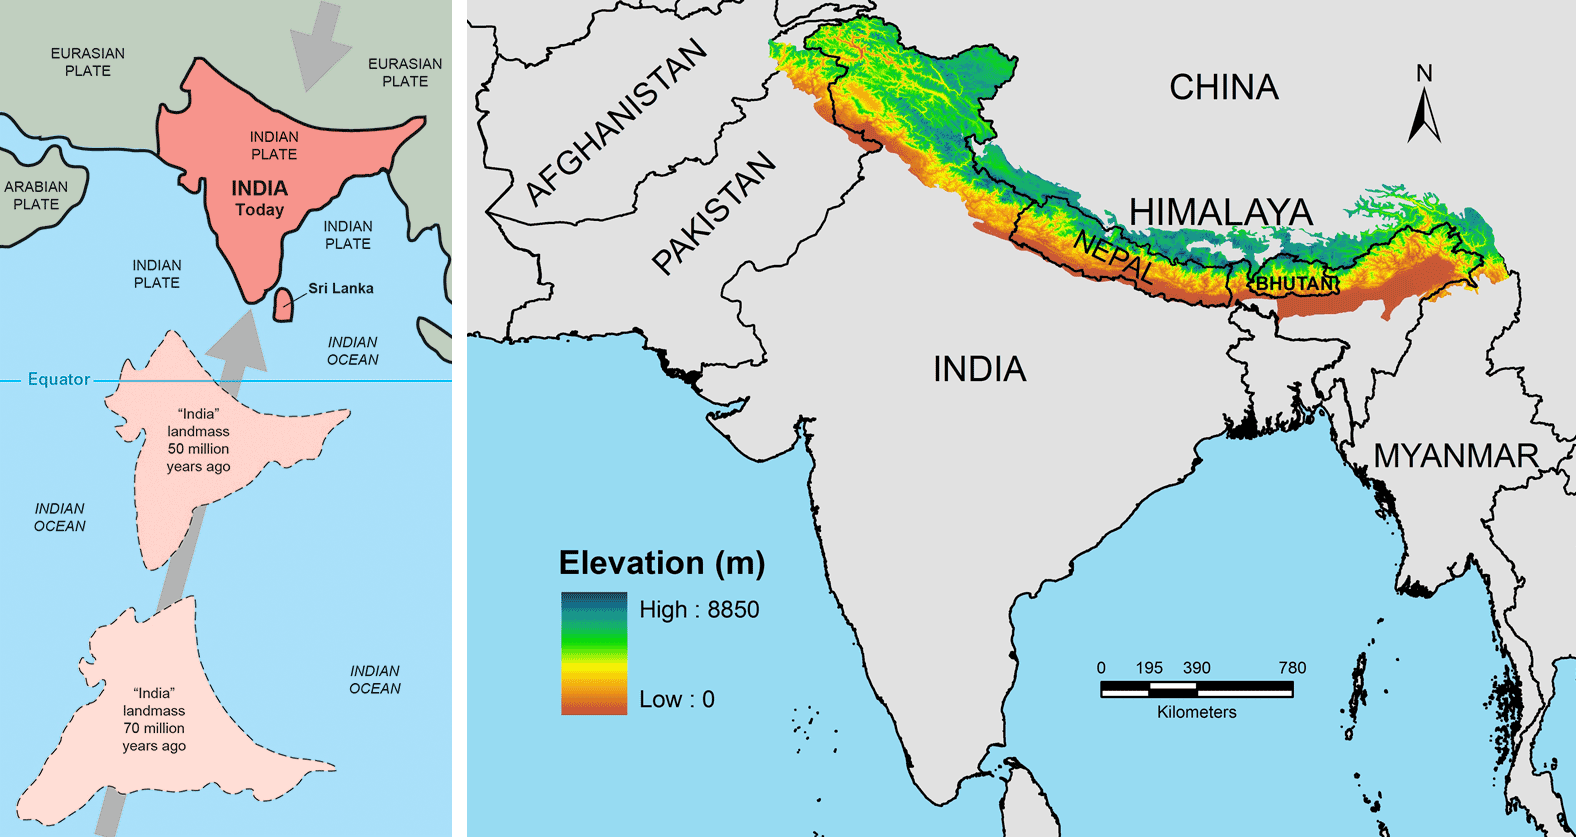 2-Panel figure. Panel 1: Map showing the position of the Indian subcontinent 70 million years ago, 50 million years ago, and today. Panel 2: Map showing the location and the evolution of the Himalayan Mountains today.